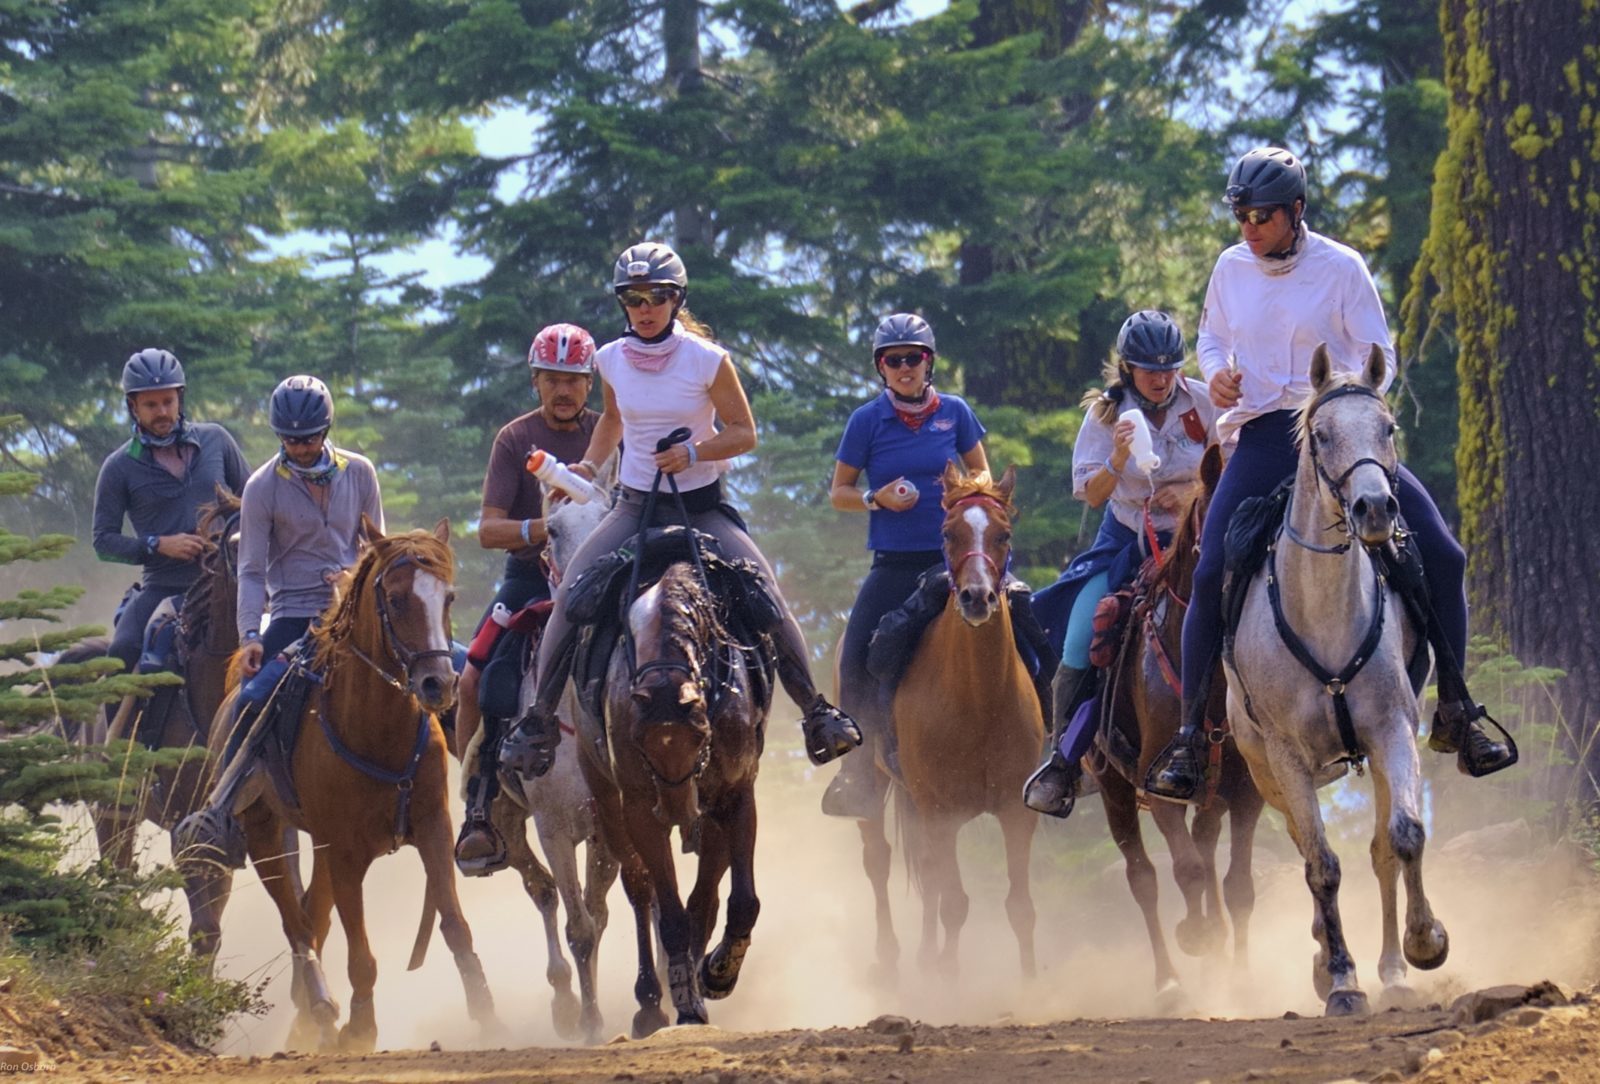 100-Mile Tevis Cup: One of the Top Ten Endurance Competitions in